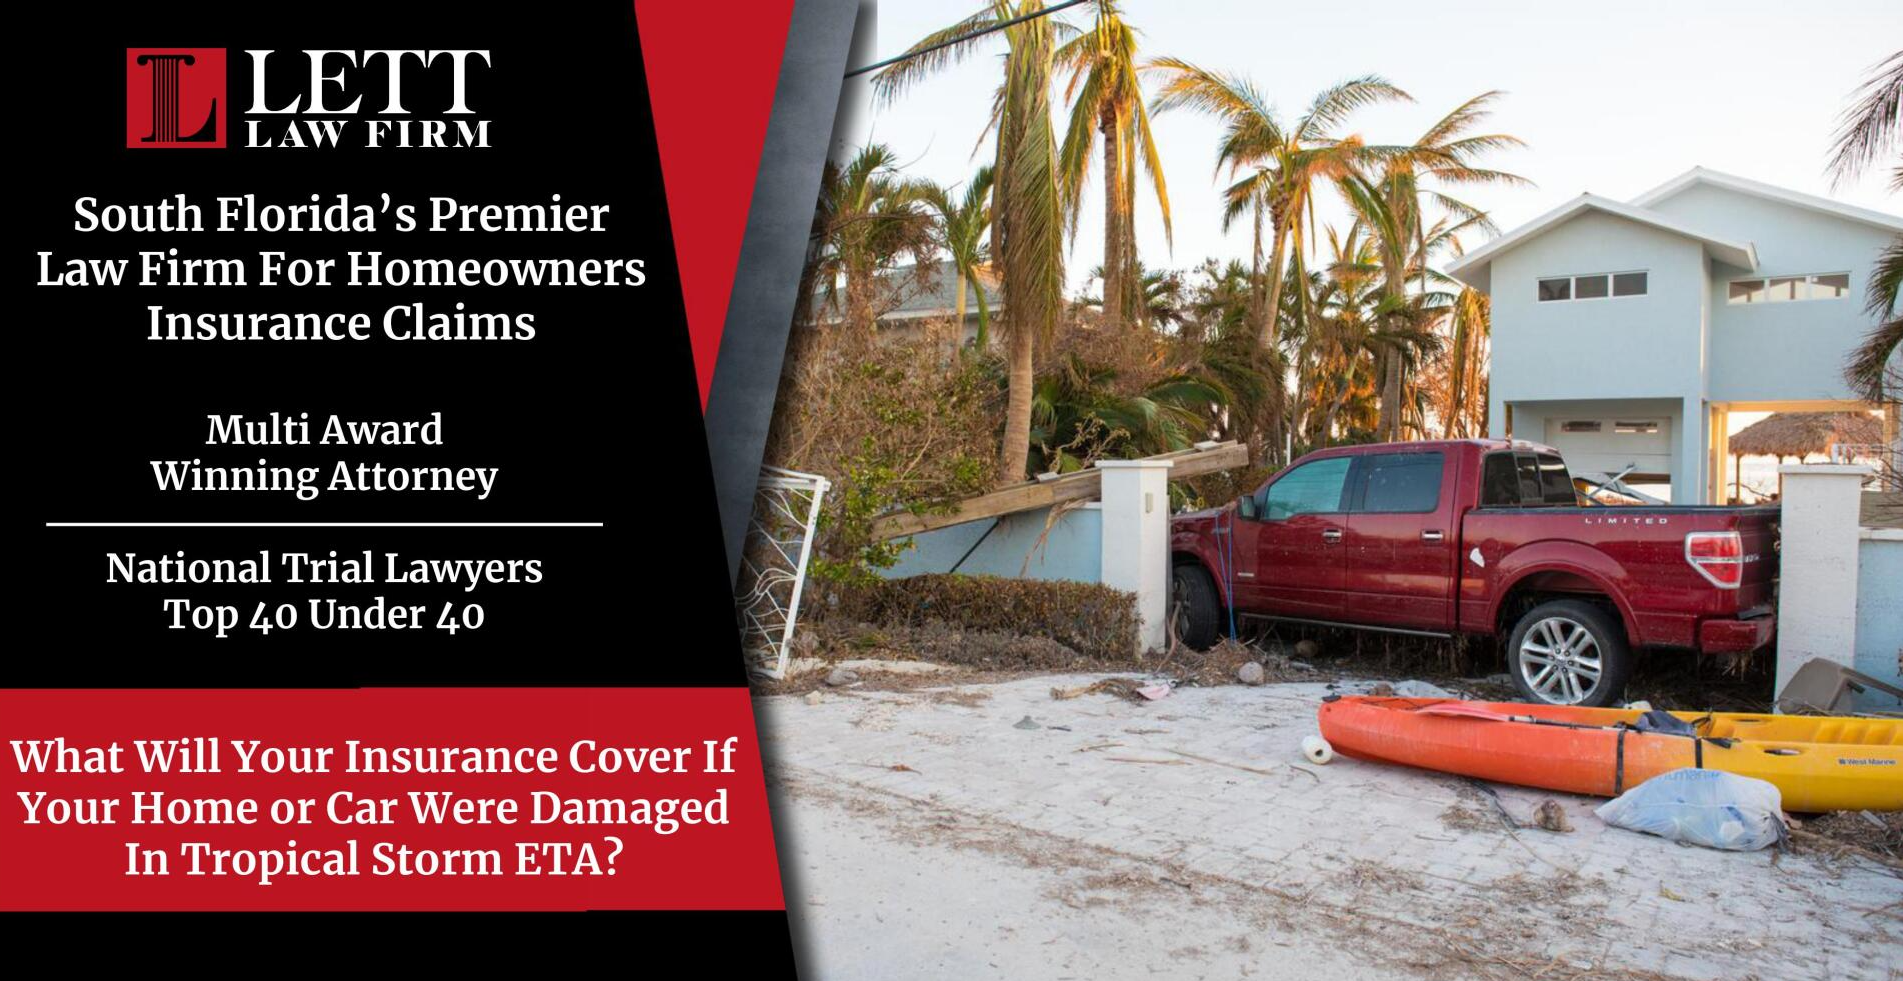 Miami Homeowners Insurance Lawyer - What Will Your Insurance Cover If Your Home or Car Were Damaged In Tropical Storm ETA?